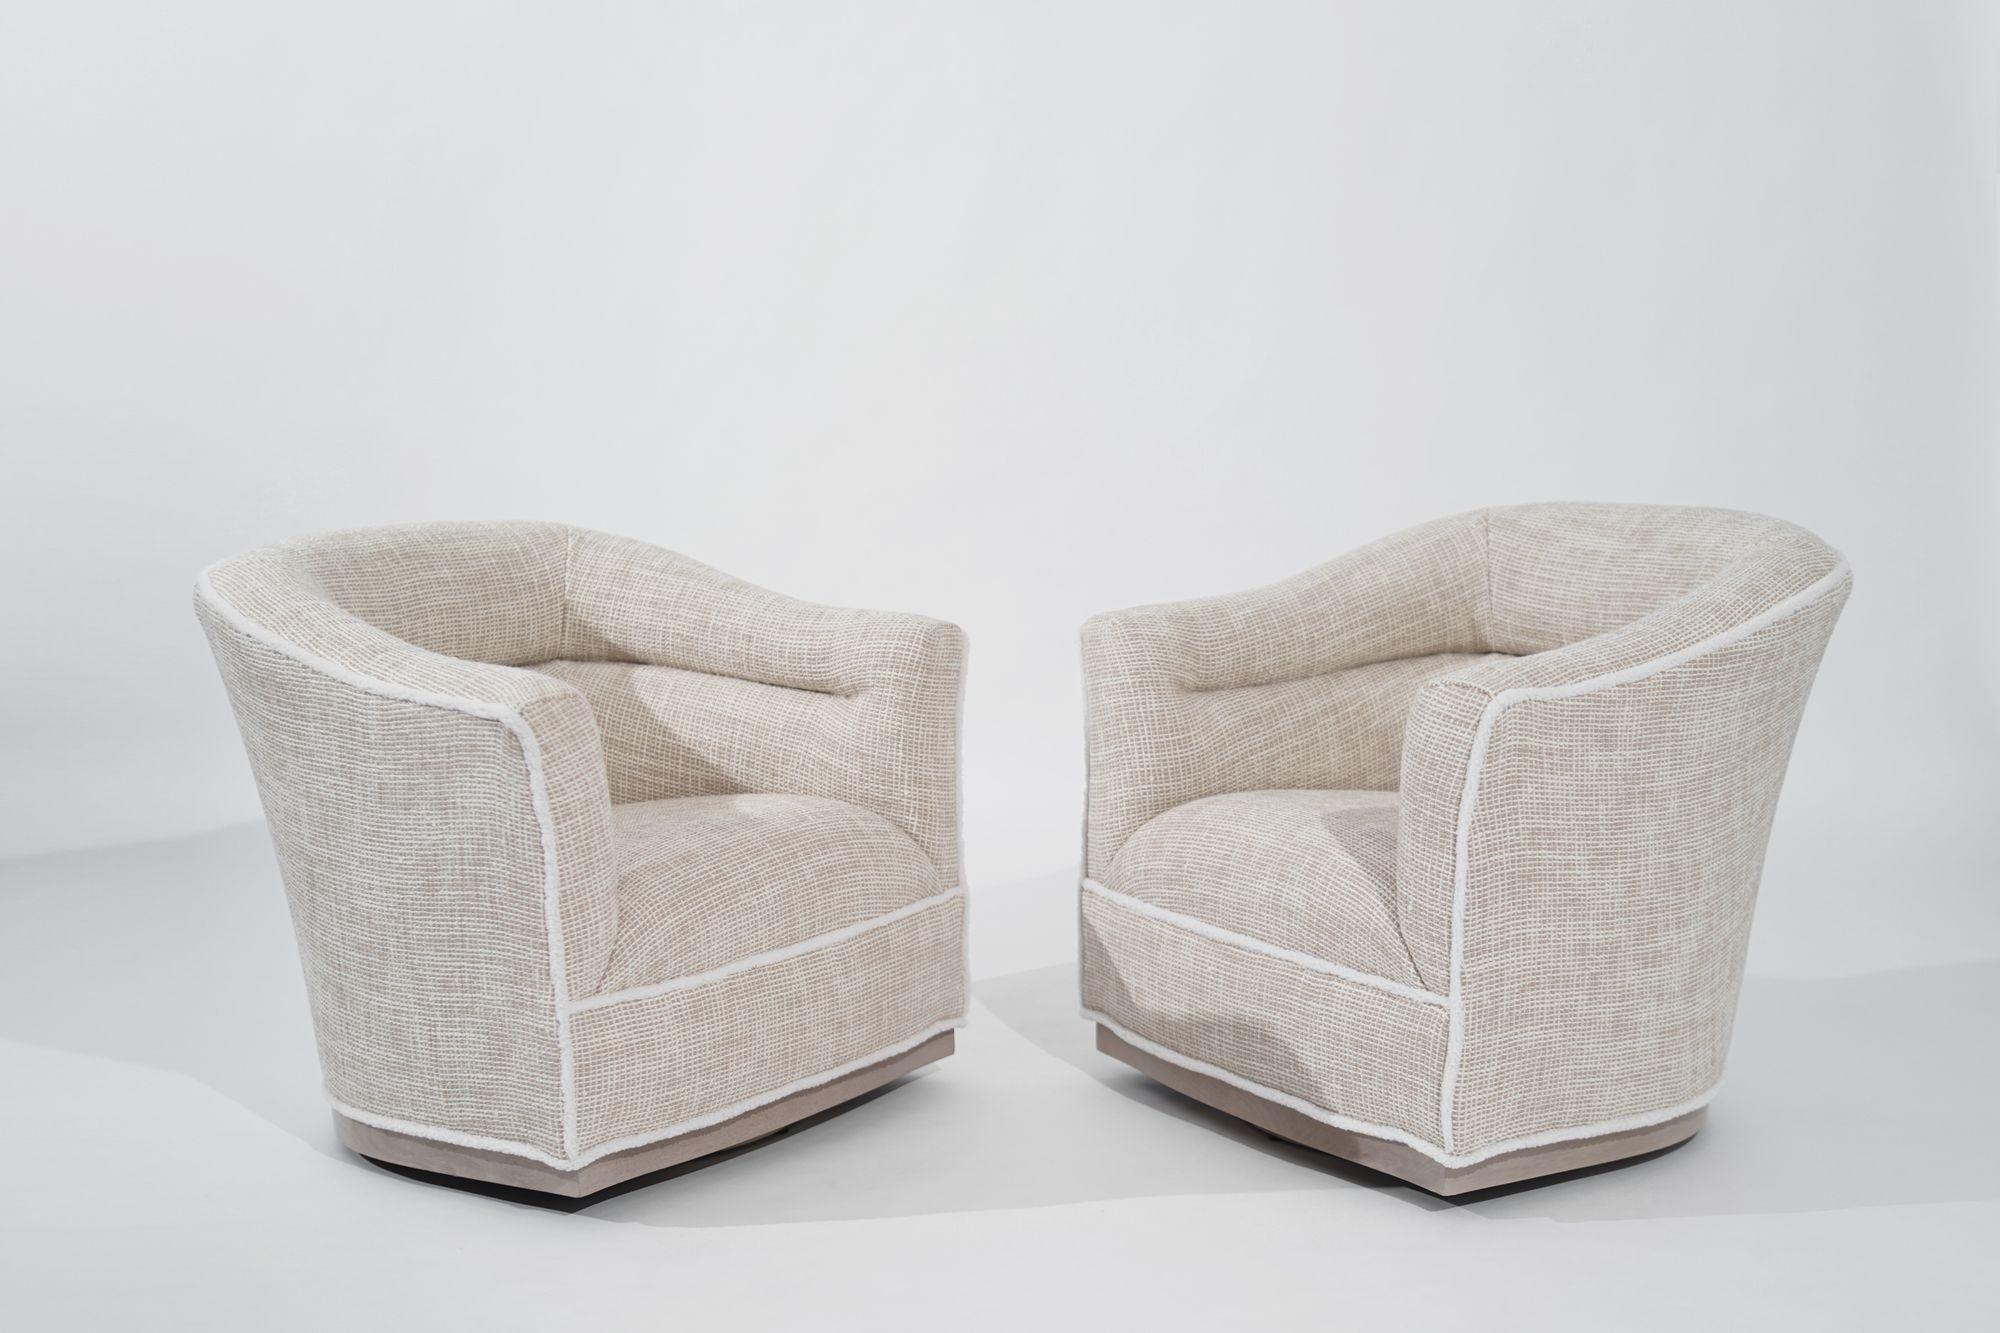 Stunning pair of Scandinavian Modern swivel chairs, originating from Sweden and crafted in the 1950s. Meticulously restored by Stamford Modern, these chairs have been brought back to their original glory, showcasing the timeless elegance of